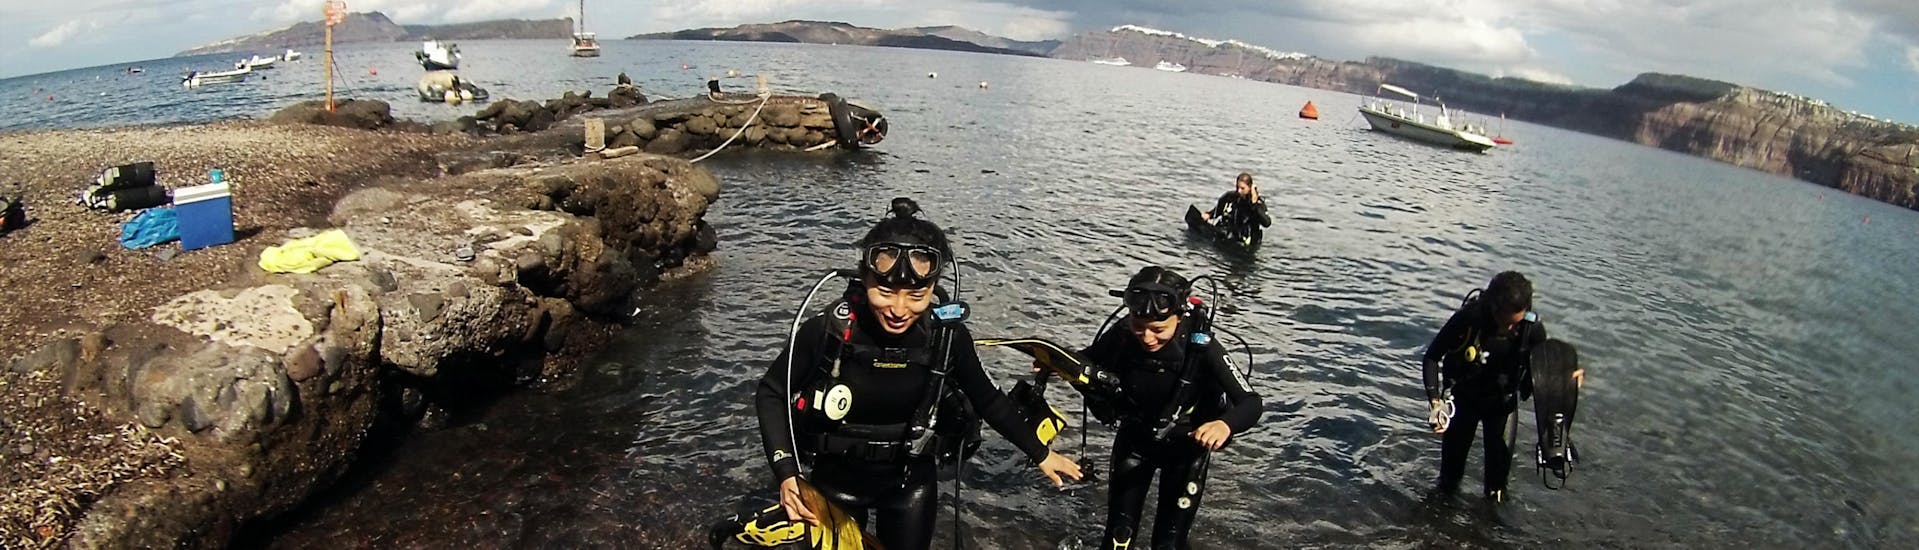 Group during their Guided Dives in Santorini.